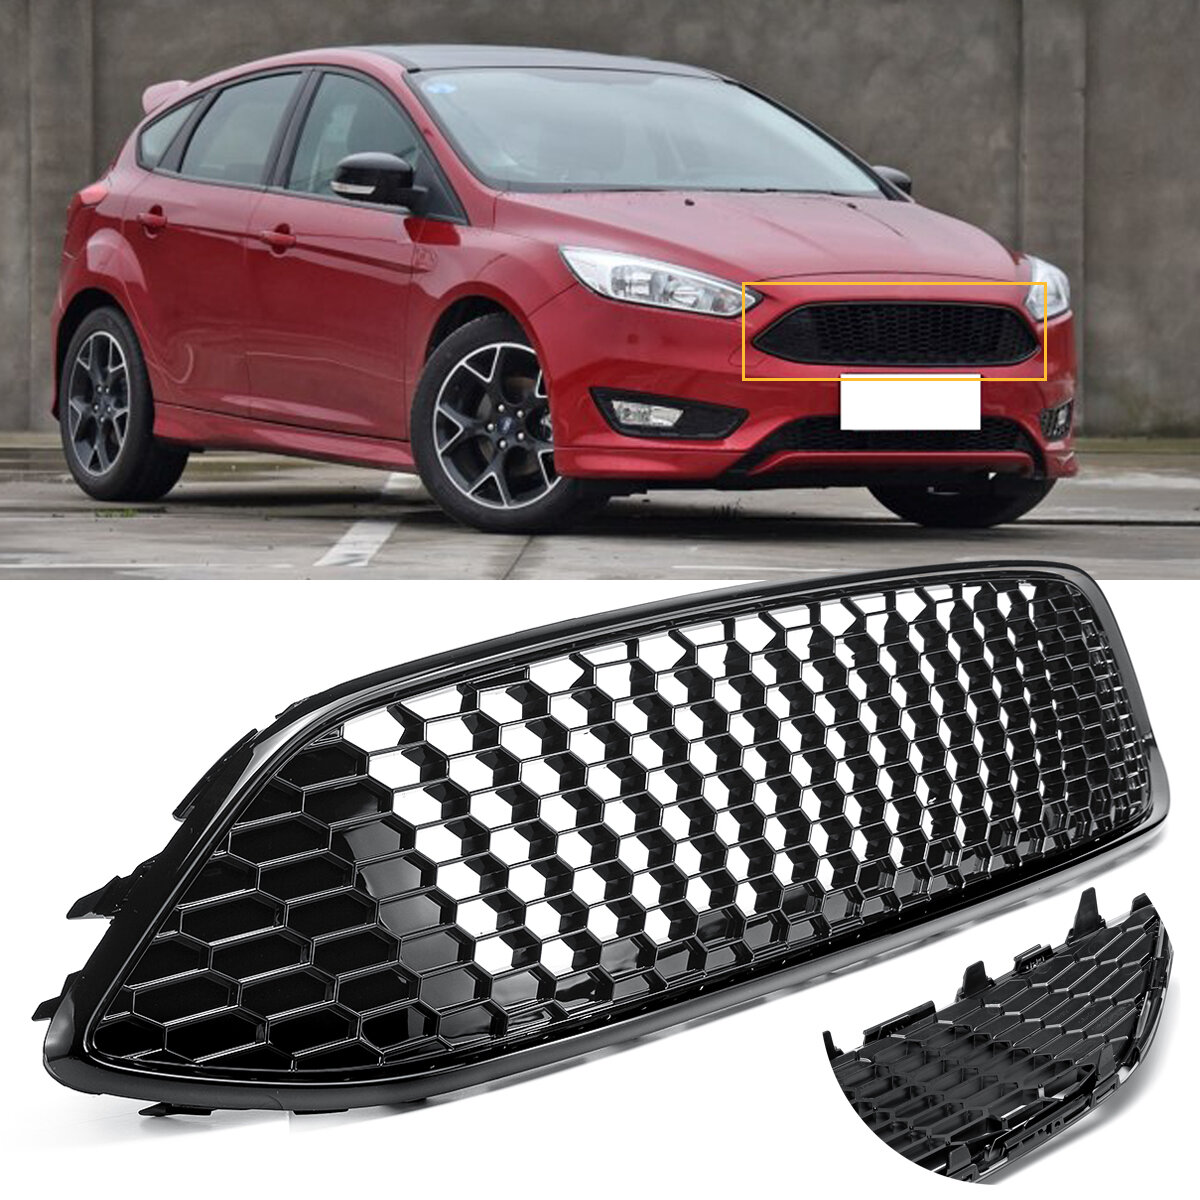 

Front Radiator Centre Meshed Grille Panel Bumper Cover Car Grill for Ford Focus Mk3